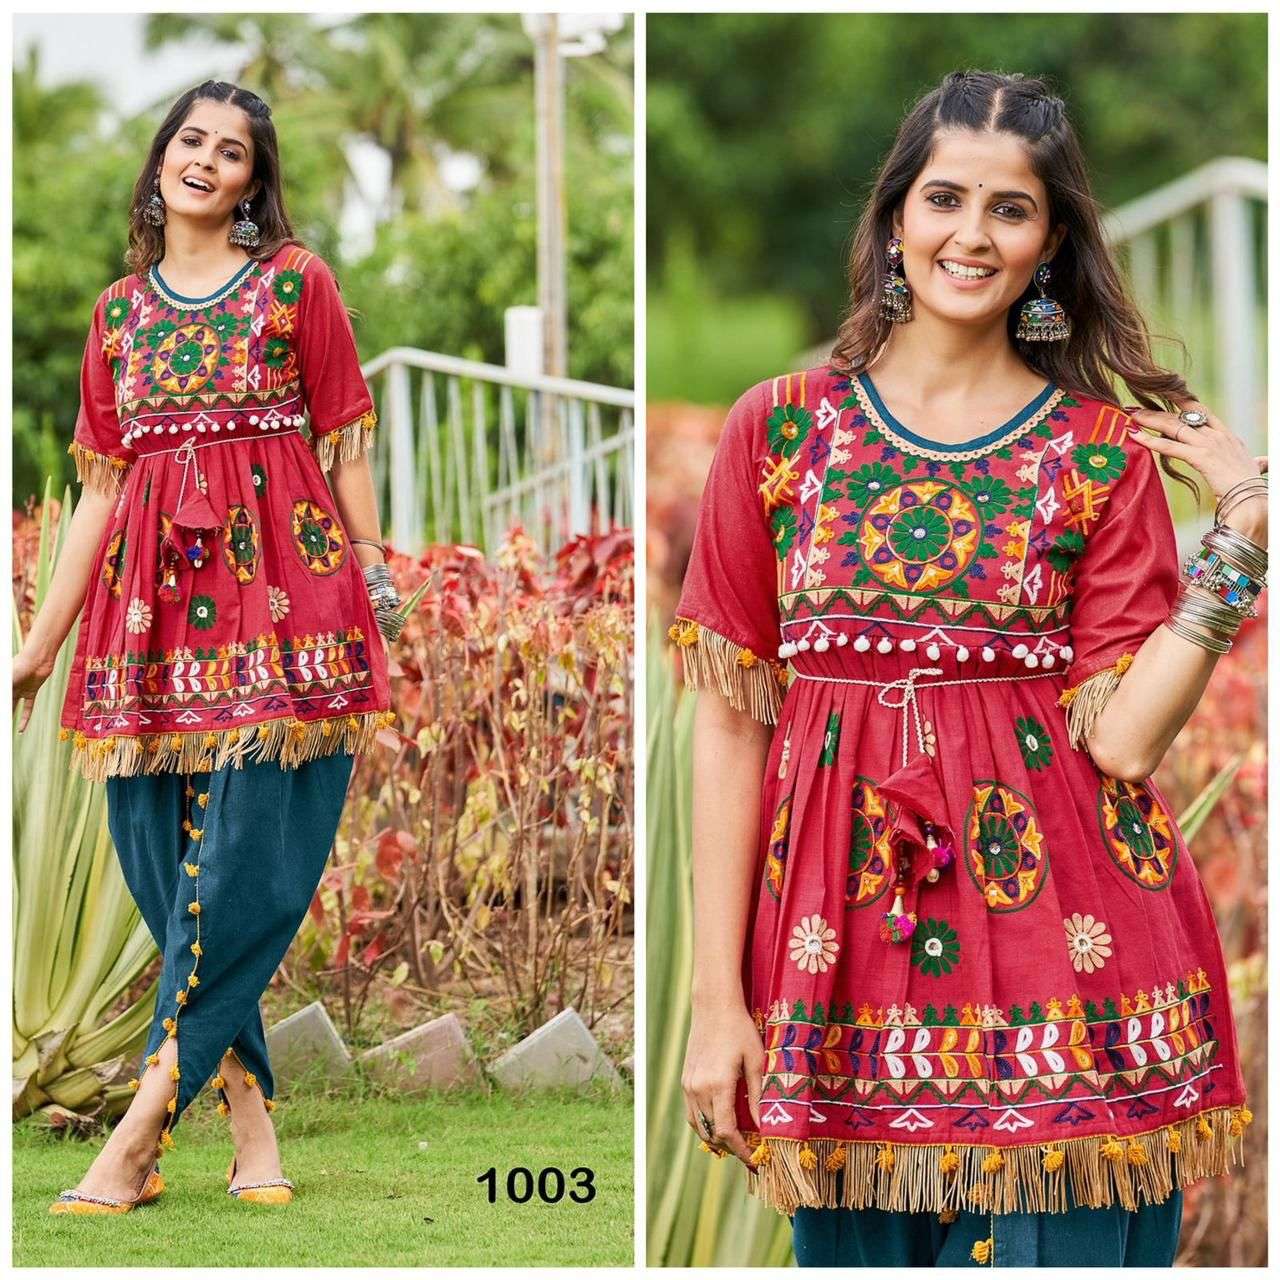 Gujarati traditional navrarti wear with amazing craftsmanship of designs and patterns